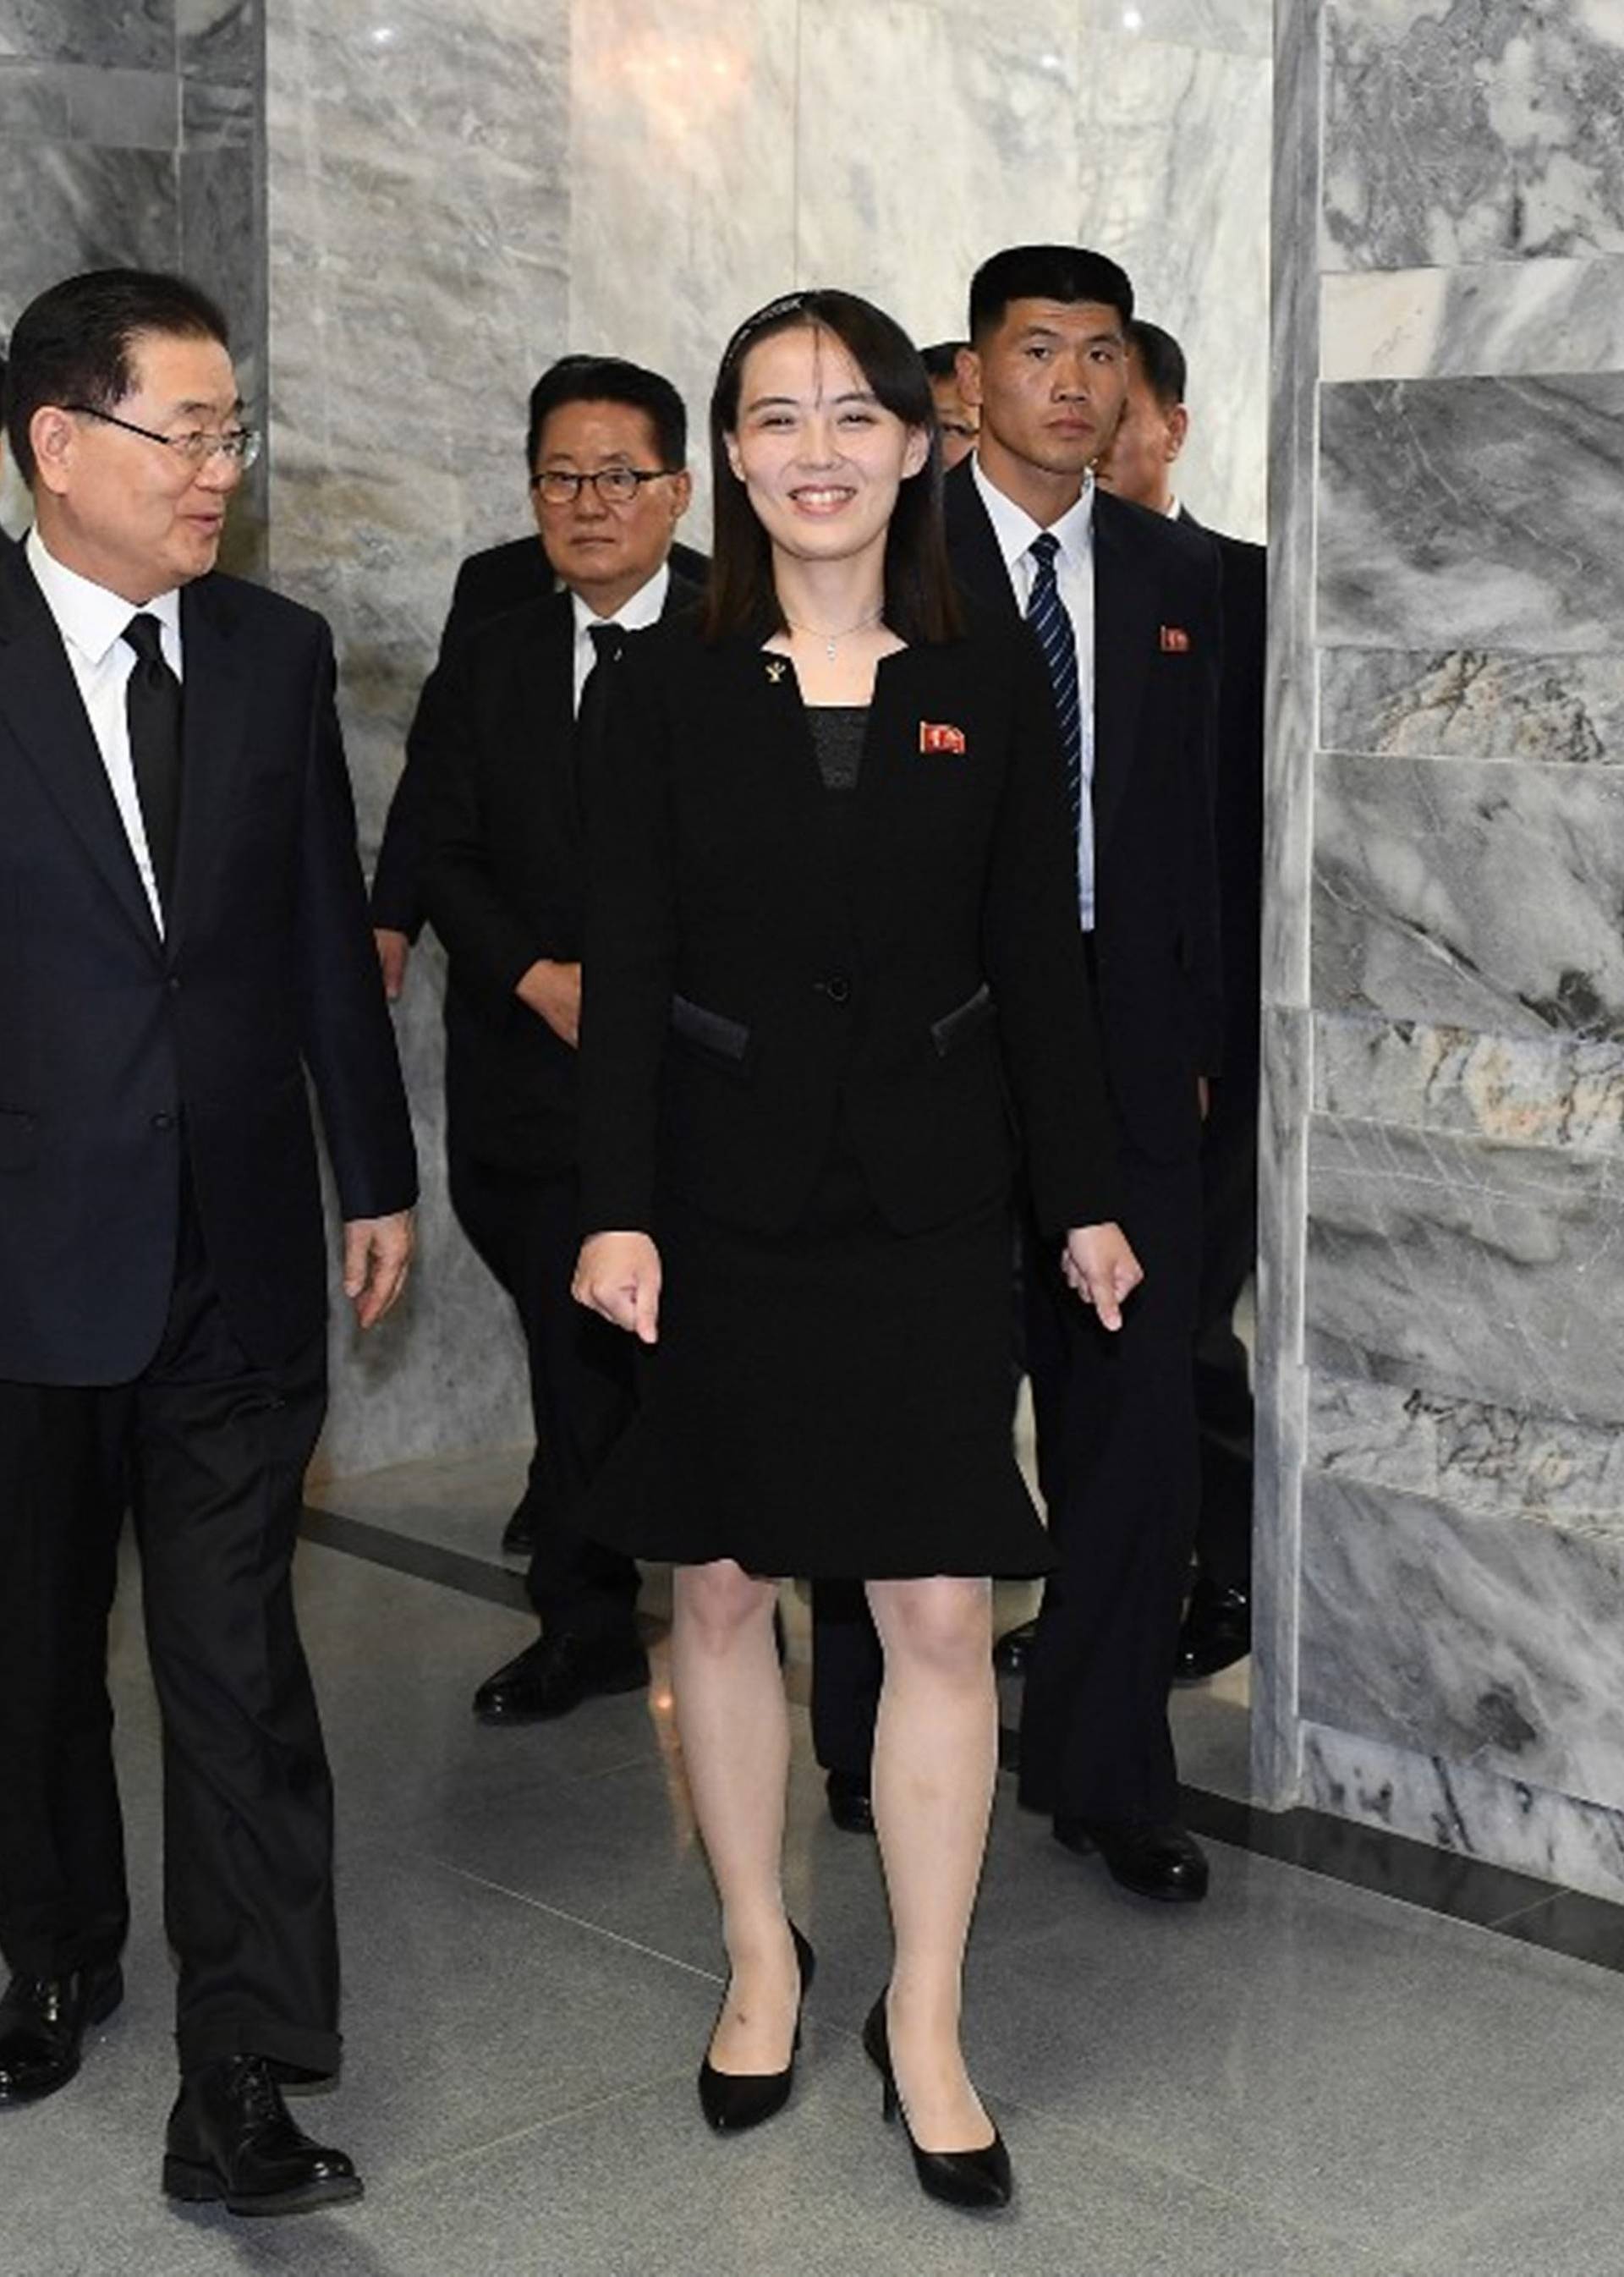 N.K. leader offers condolences over former first lady's death